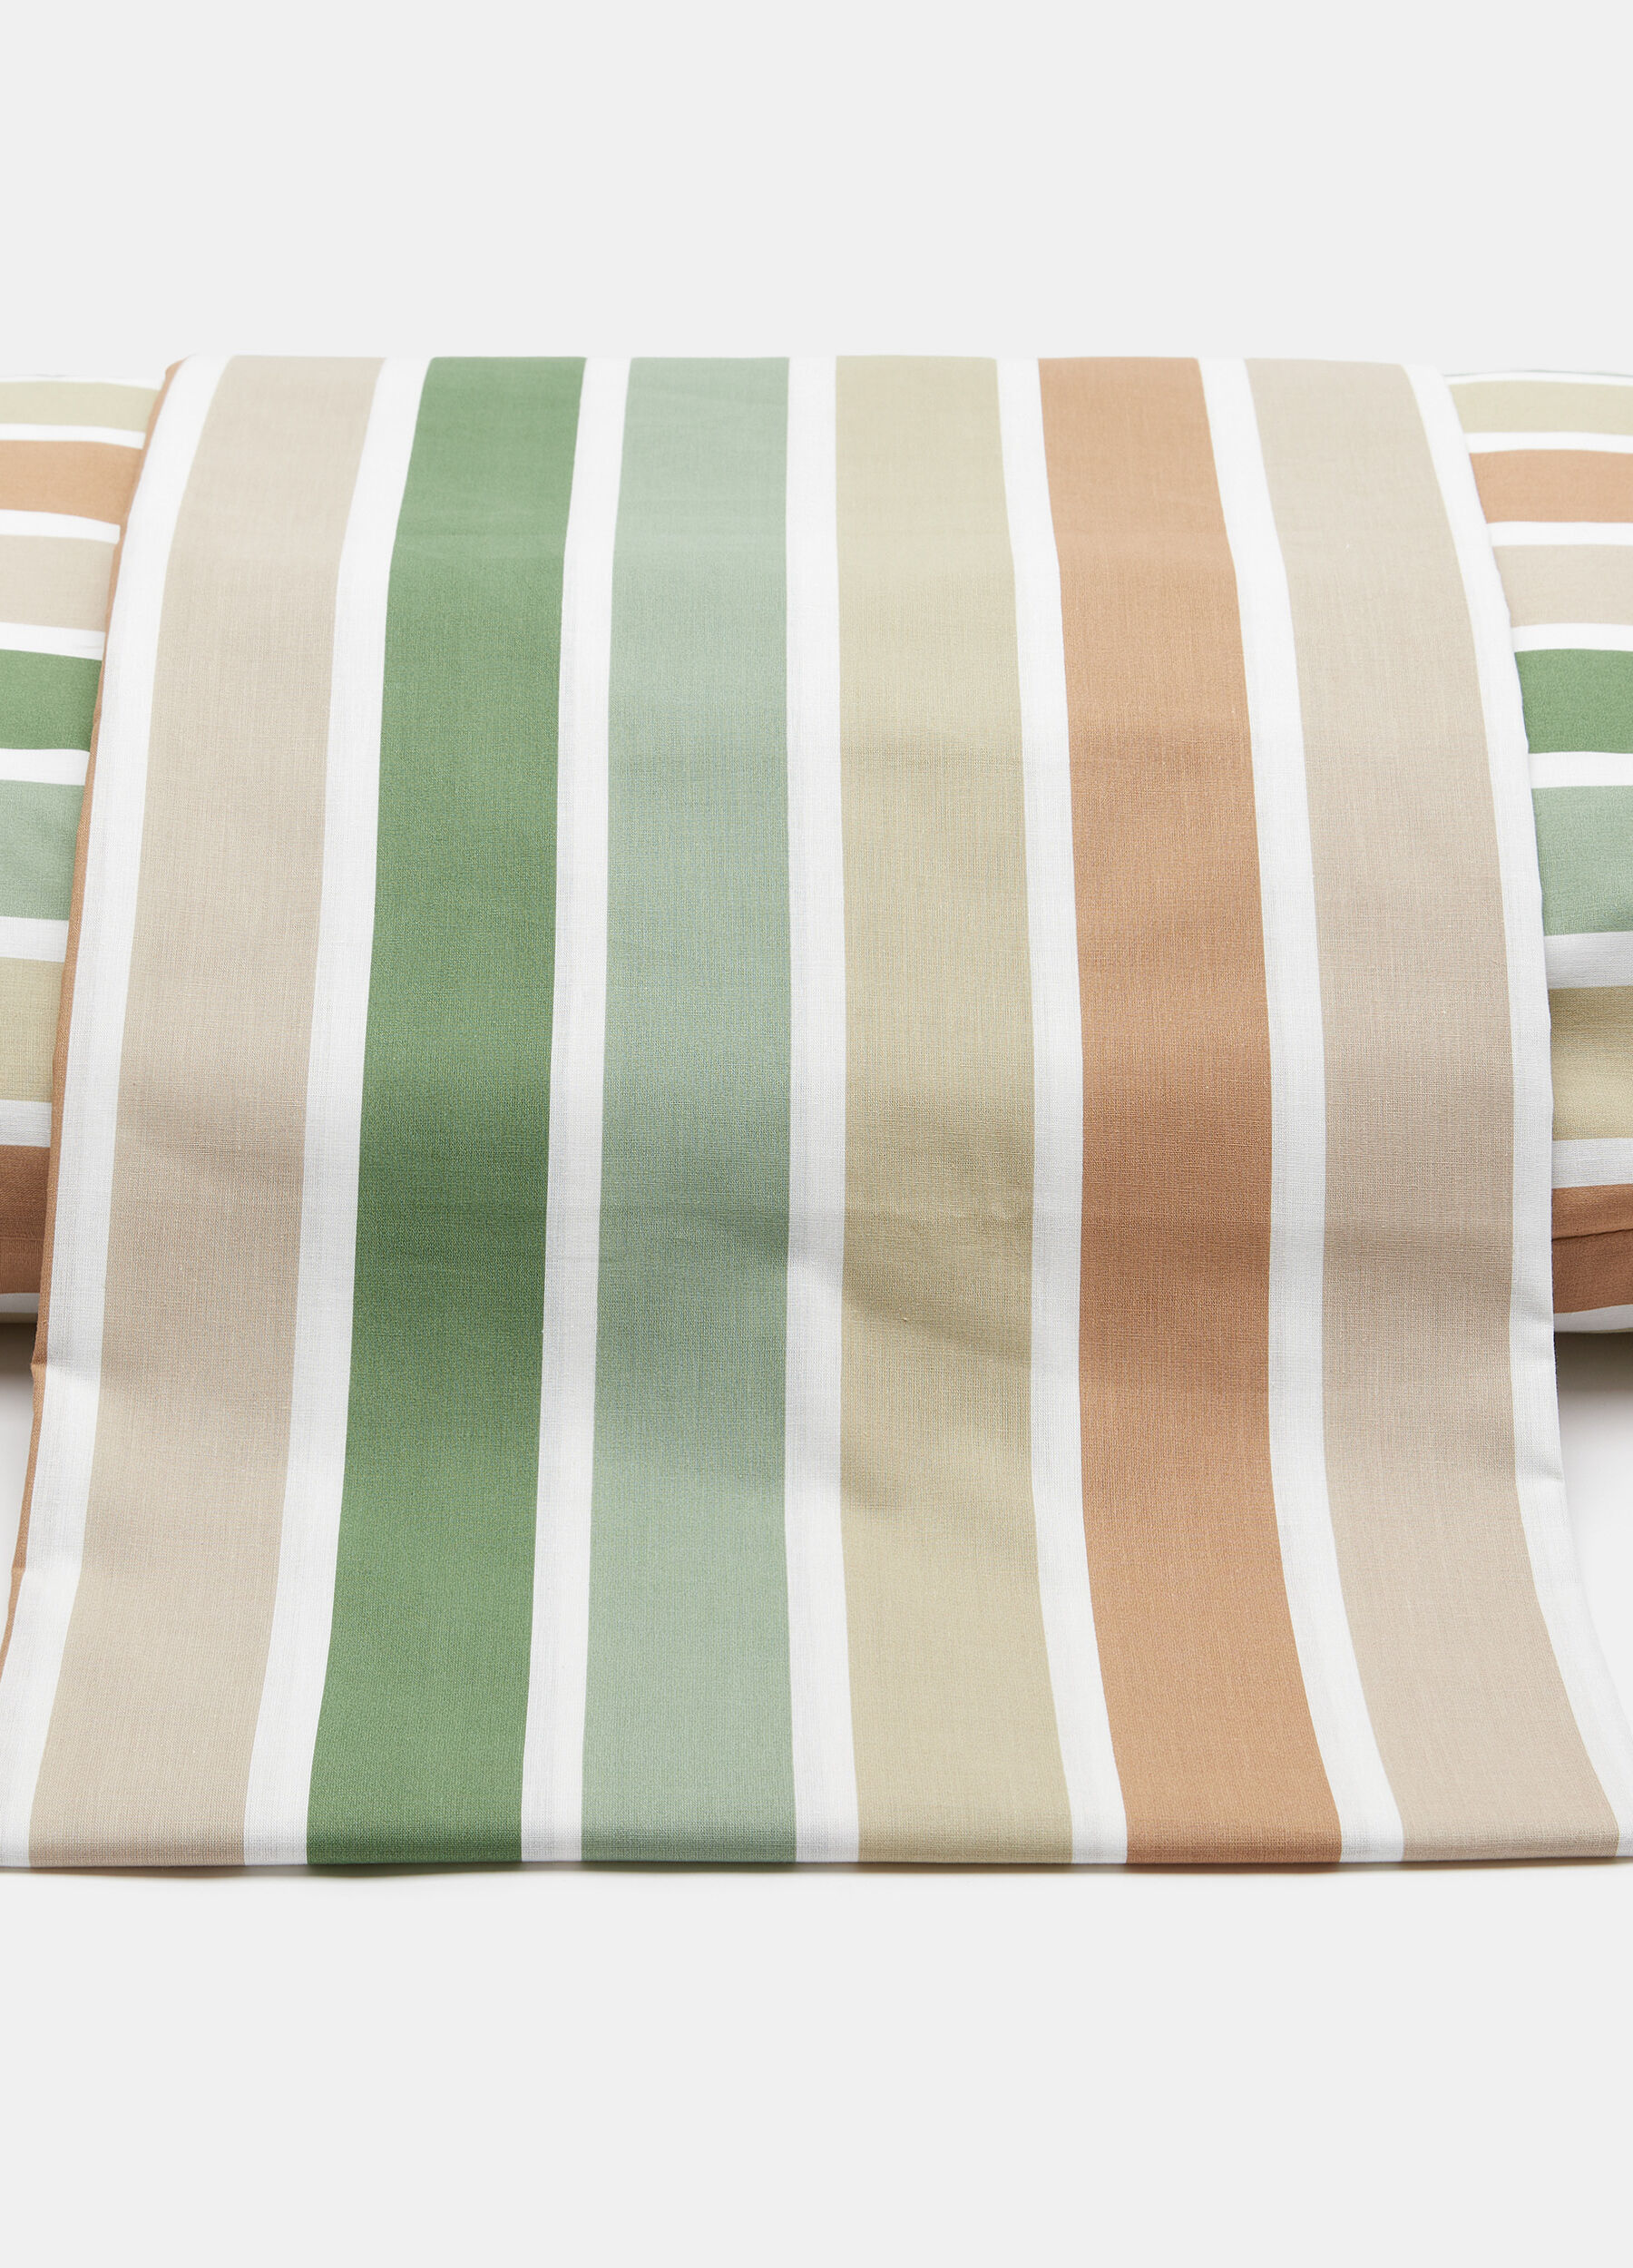 Set of 1 double bed sheet + 2 striped pillowcases in 100% cotton